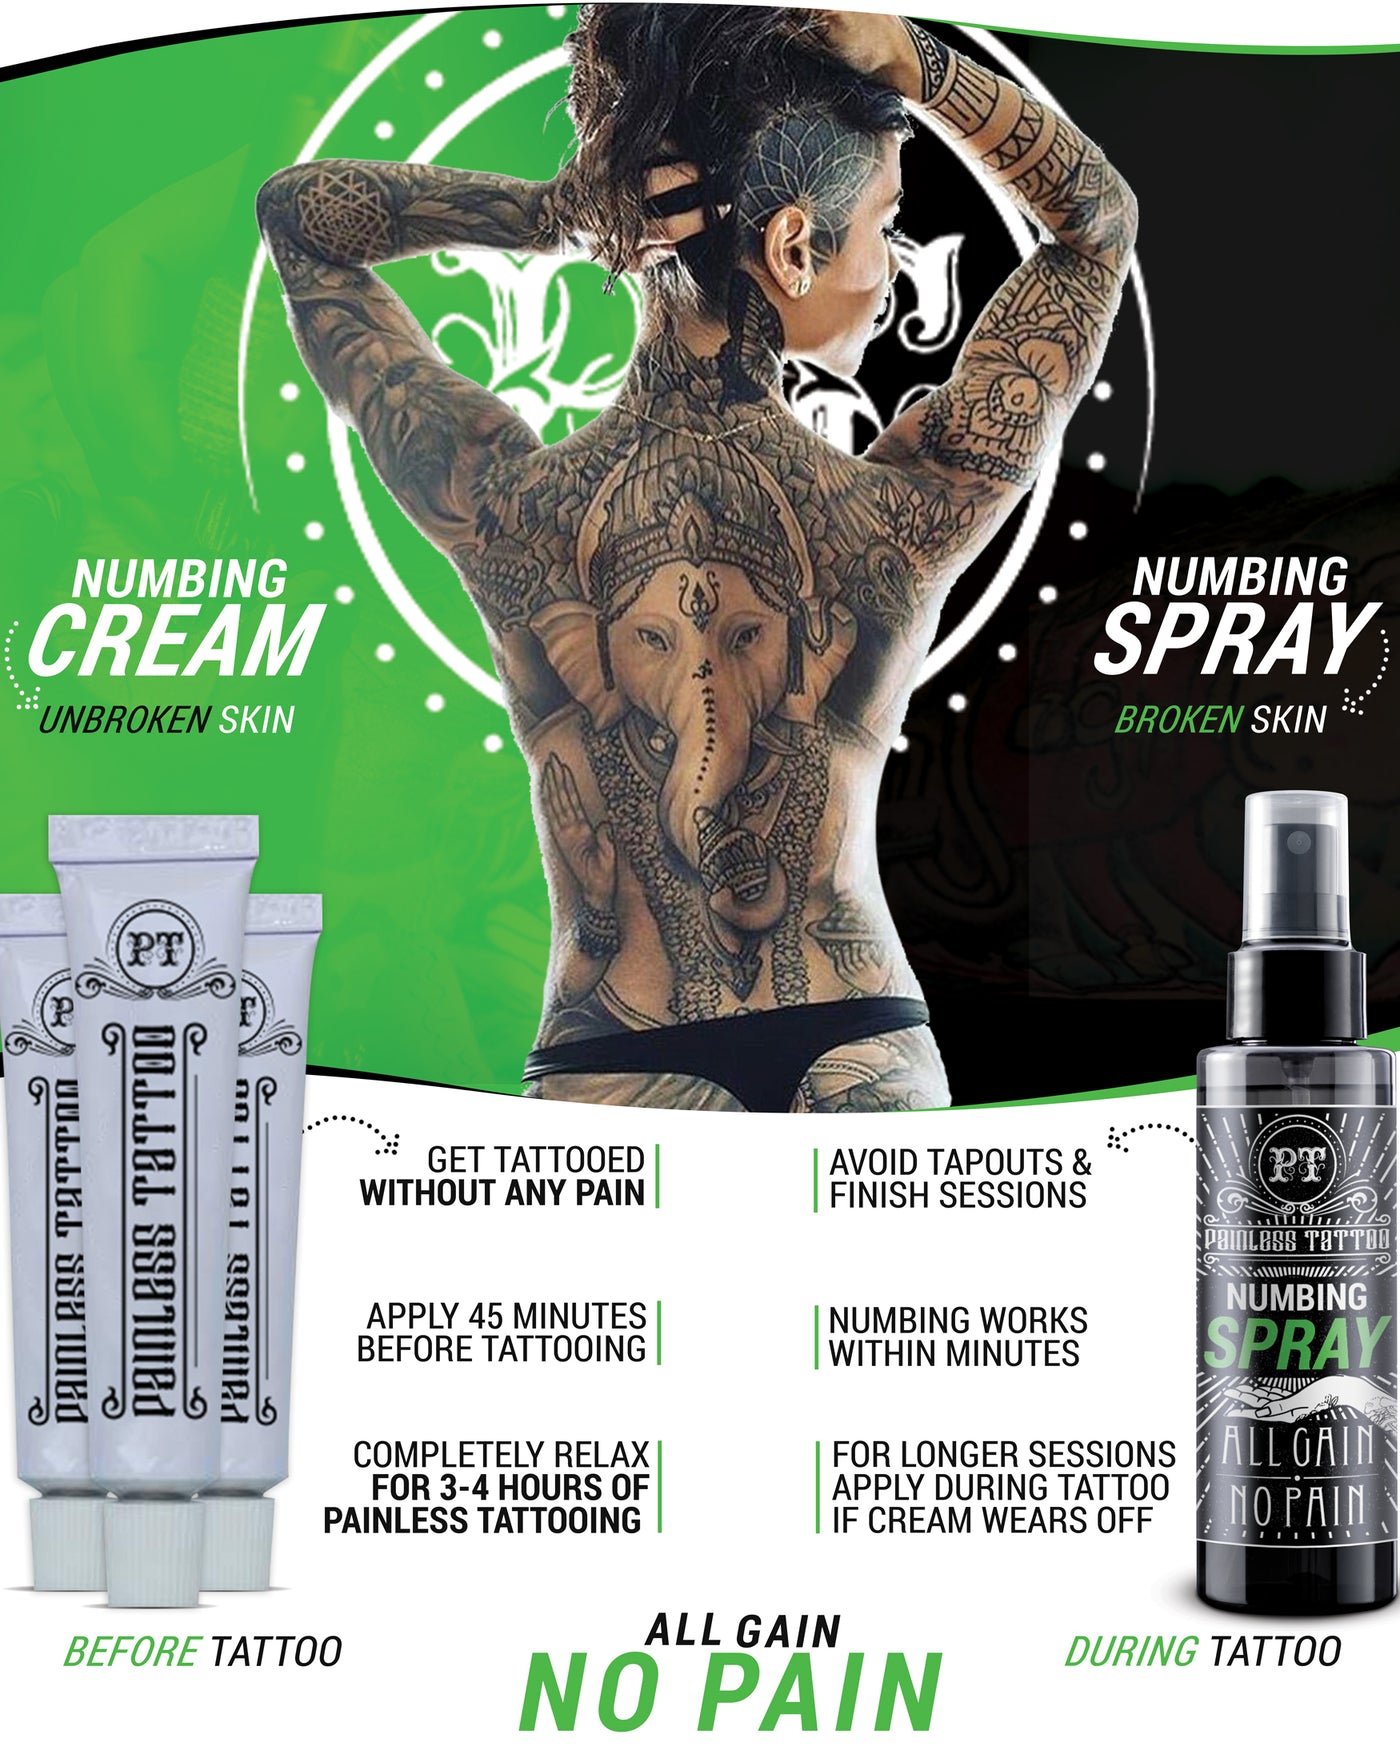 Pin on Painless Tattoo CreamThe Numbing Cream That Works